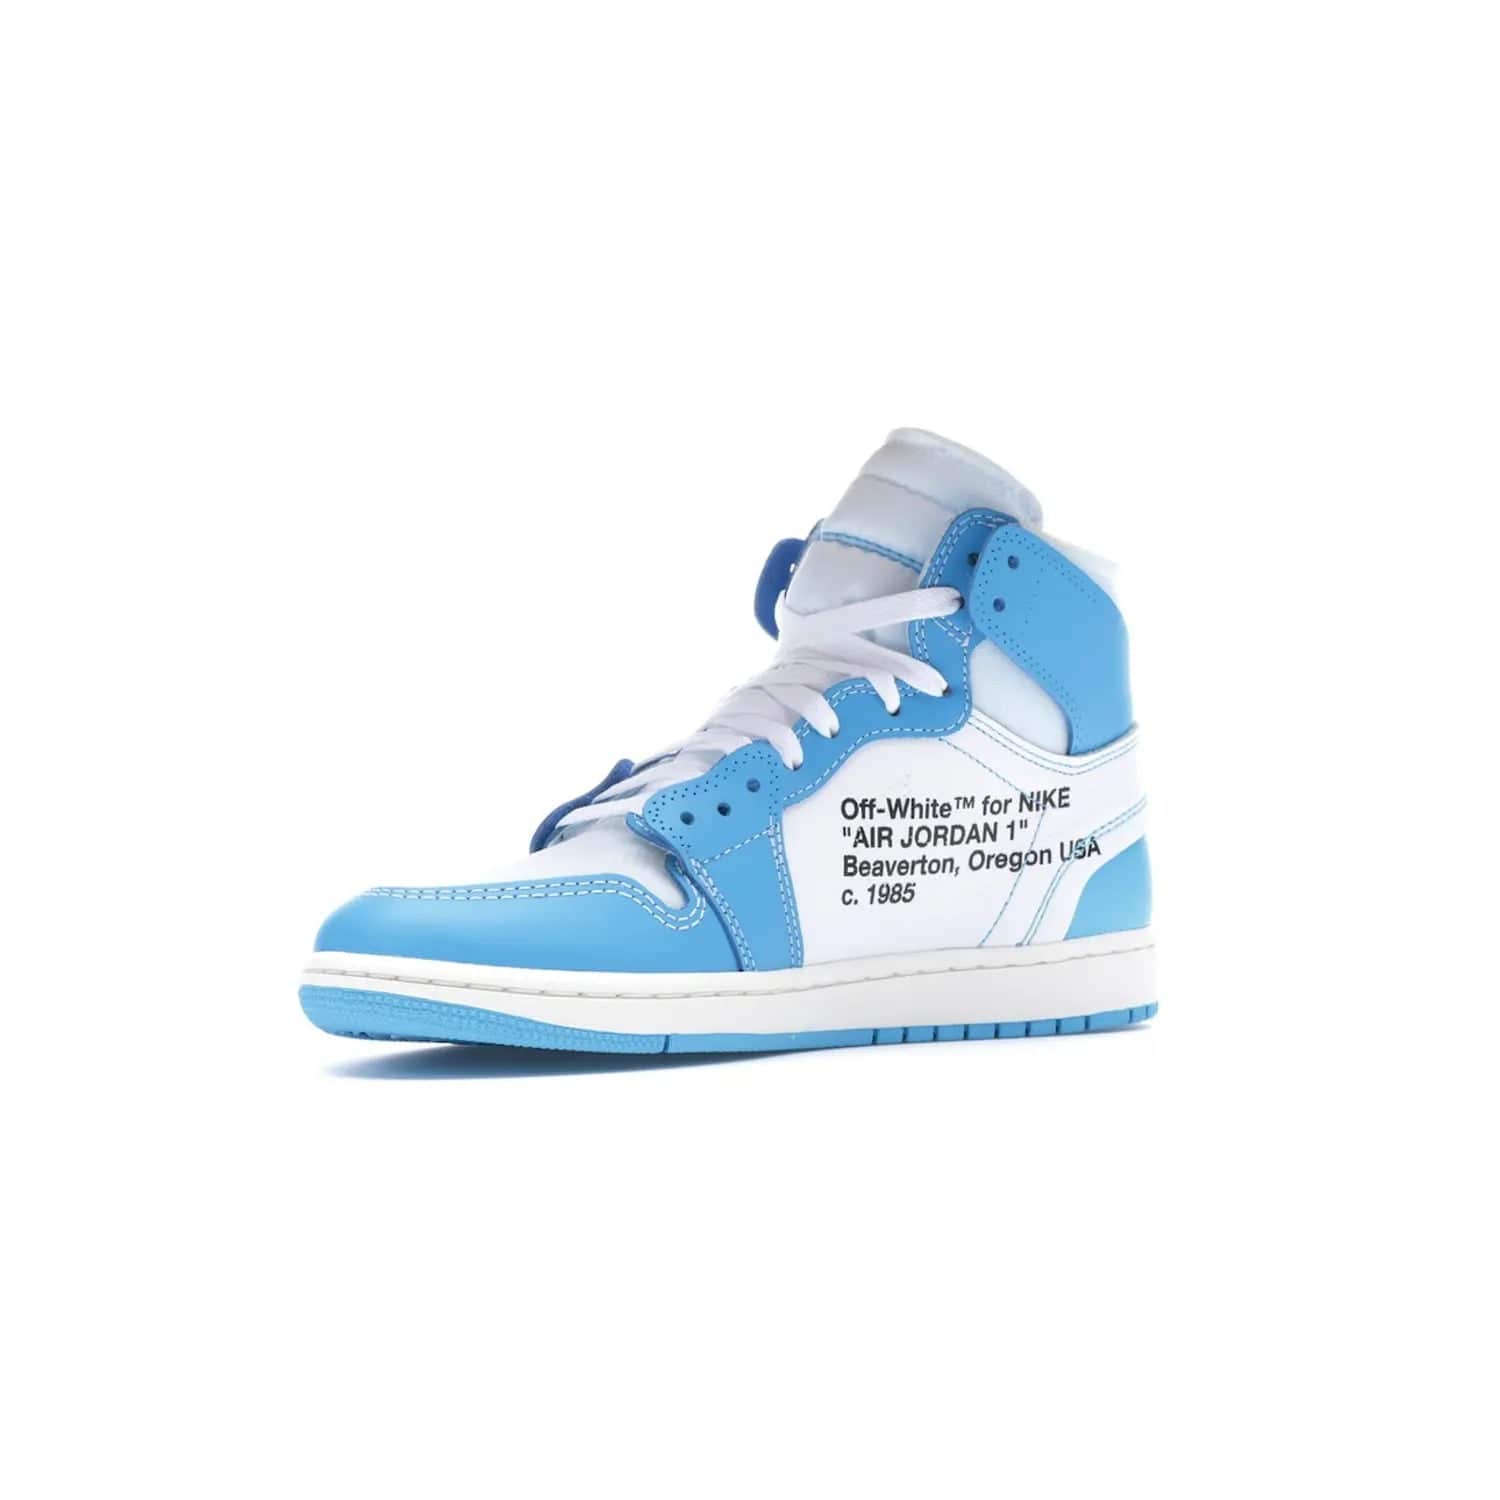 Jordan 1 Retro High Off-White University Blue - Image 16 - Only at www.BallersClubKickz.com - Classic Jordan 1 Retro High "Off-White UNC" sneakers meld style and comfort. Boasting deconstructed white and blue leather, Off-White detailing, and a white, dark powder blue and cone colorway, these sneakers are perfect for dressing up or down. Get the iconic Off-White Jordan 1's and upgrade your look.